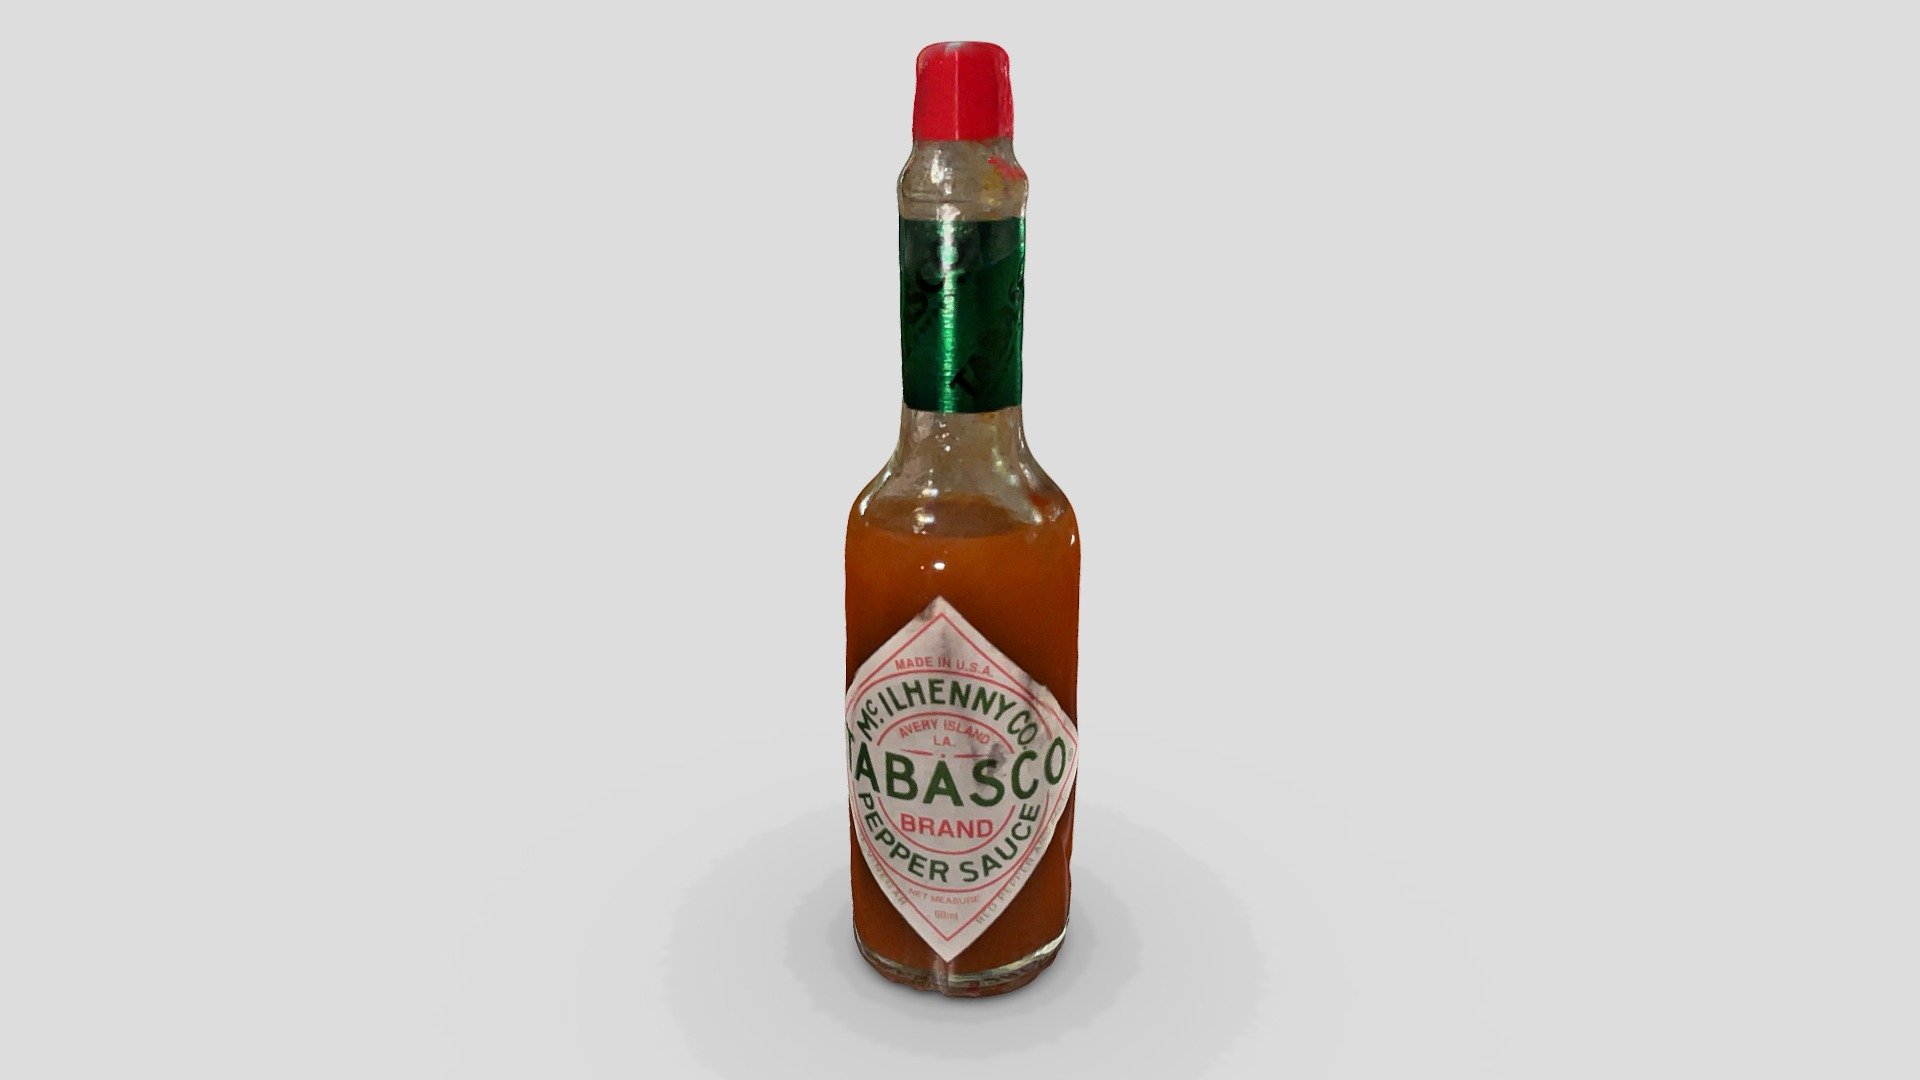 Tabasco pepper sauce scanned in 4K! The glass bottle was captured nicely! - Tabasco sauce - Download Free 3D model by Qlone 3d model